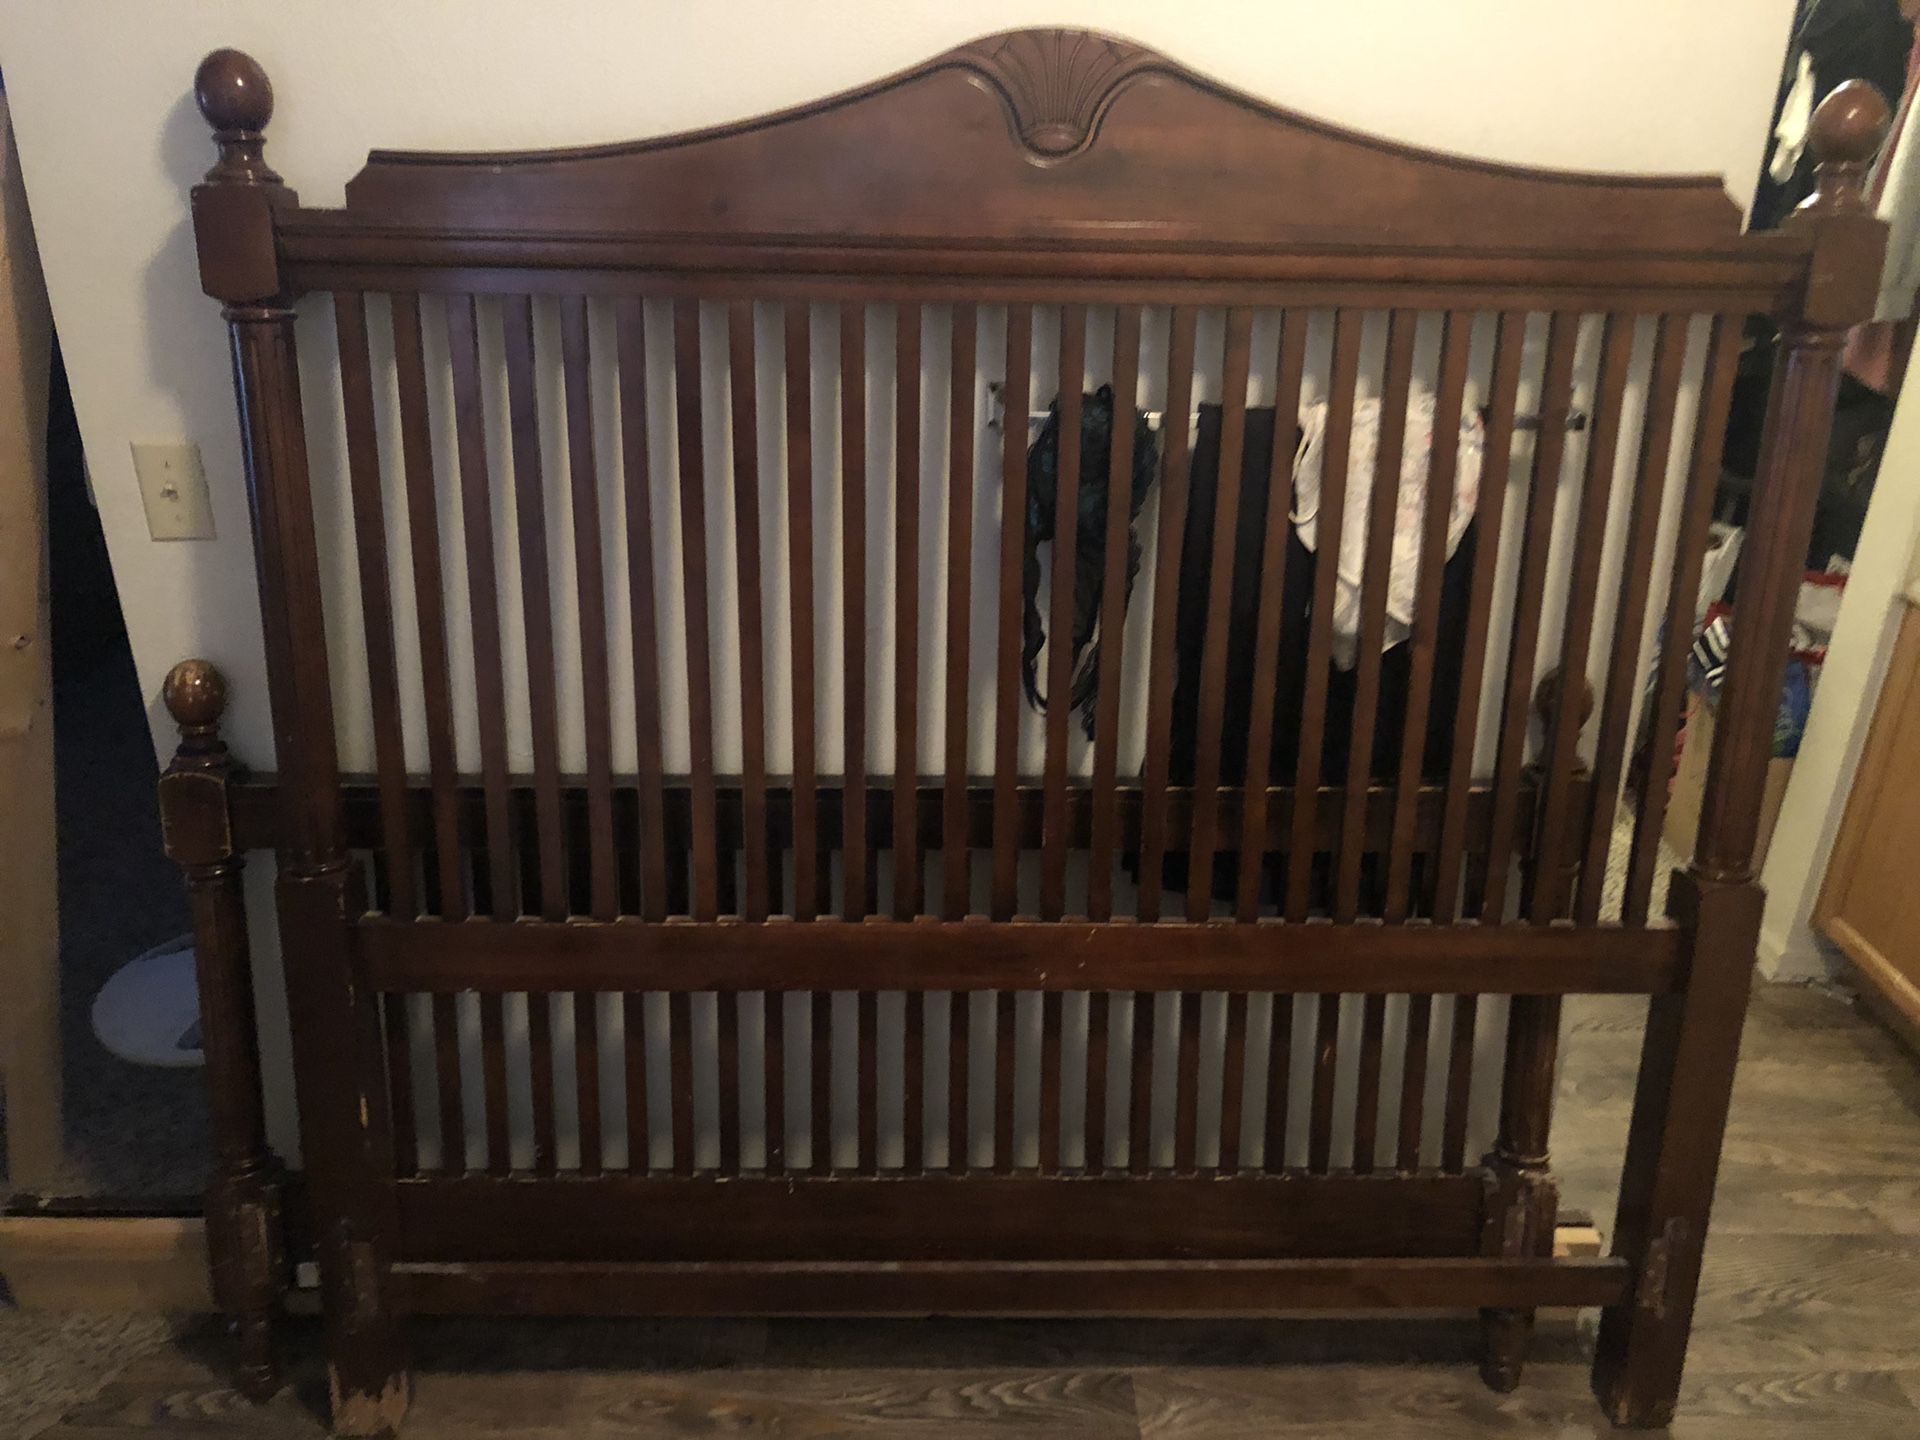 Queen Bed Frame - Used Normal Wear